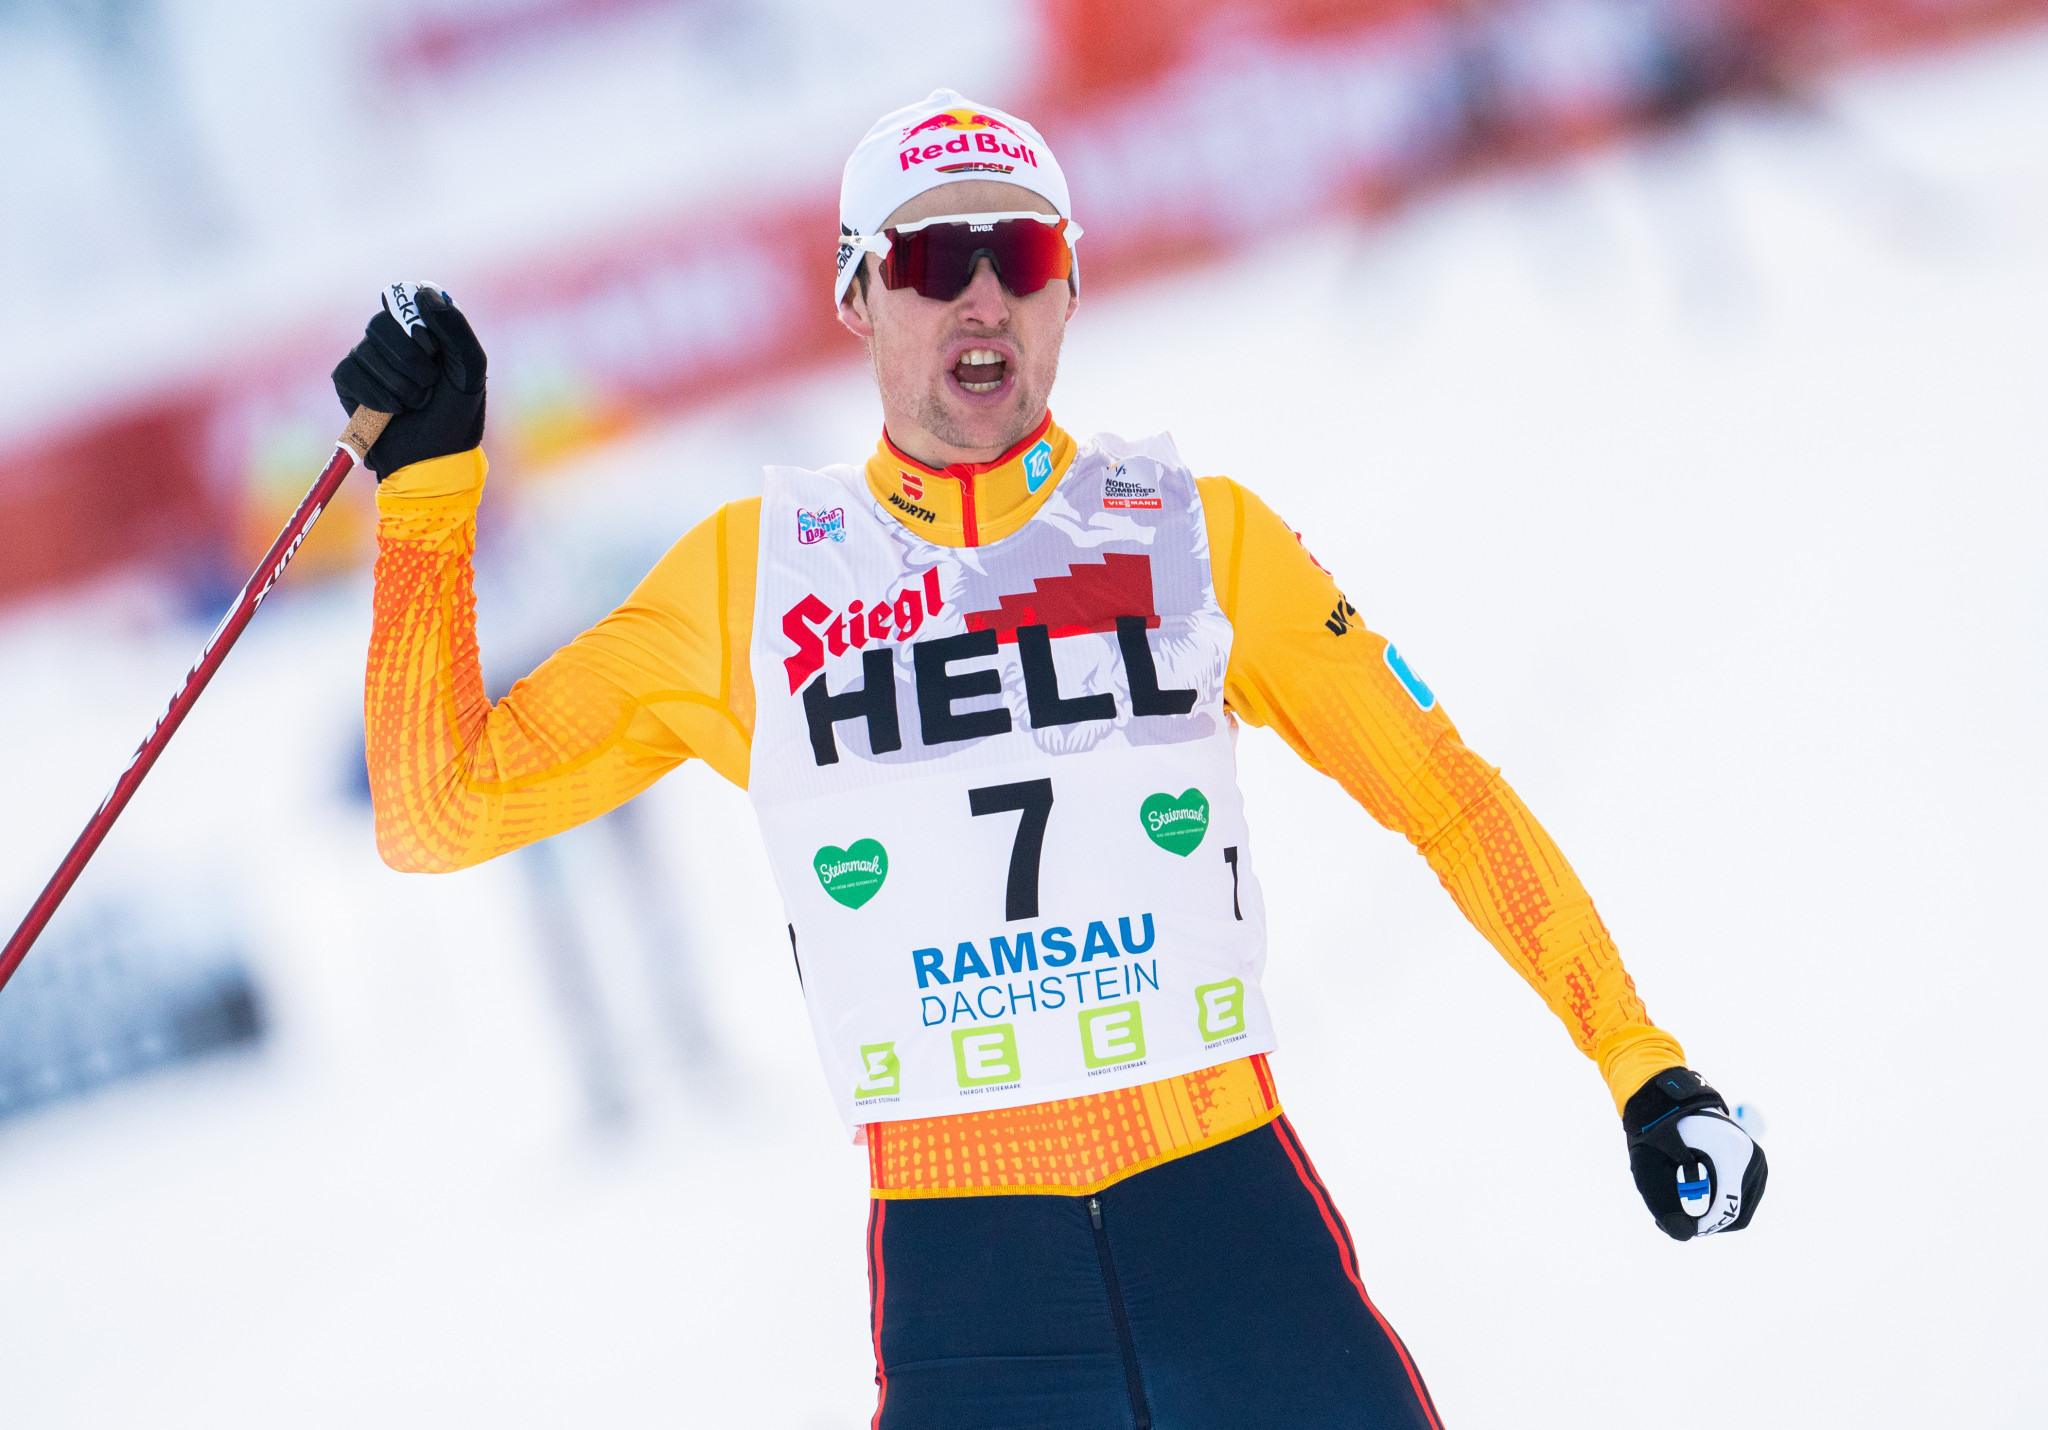 Geiger claims second successive victory at FIS Nordic Combined World Cup in Ramsau